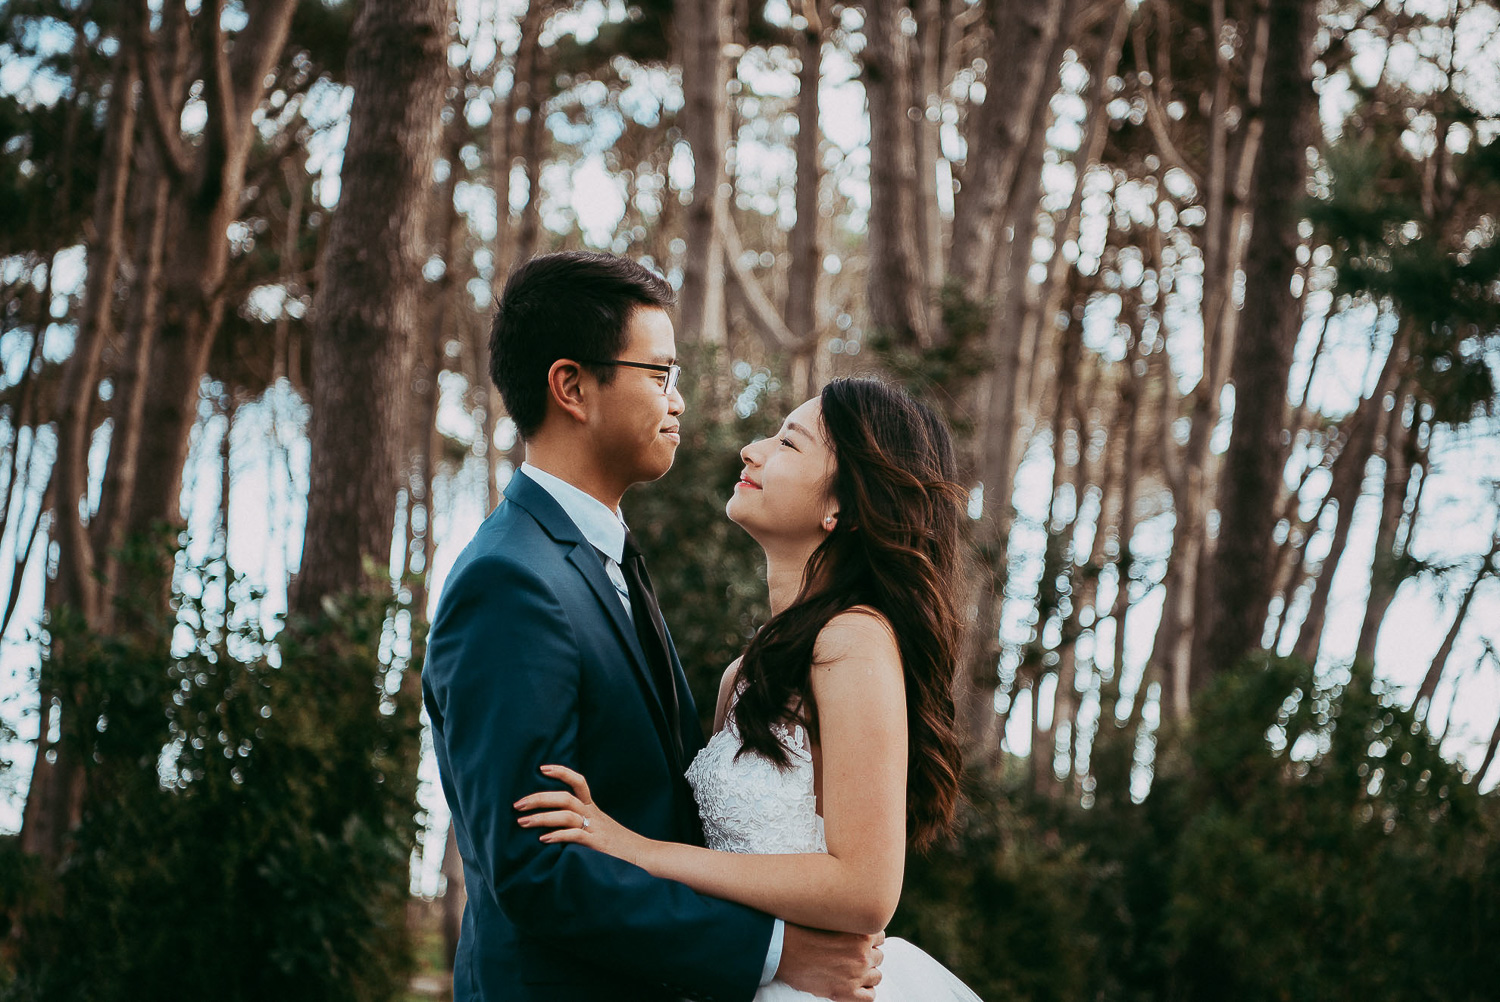 New Zealand pre-wedding engagement photographer | Auckland couples photography